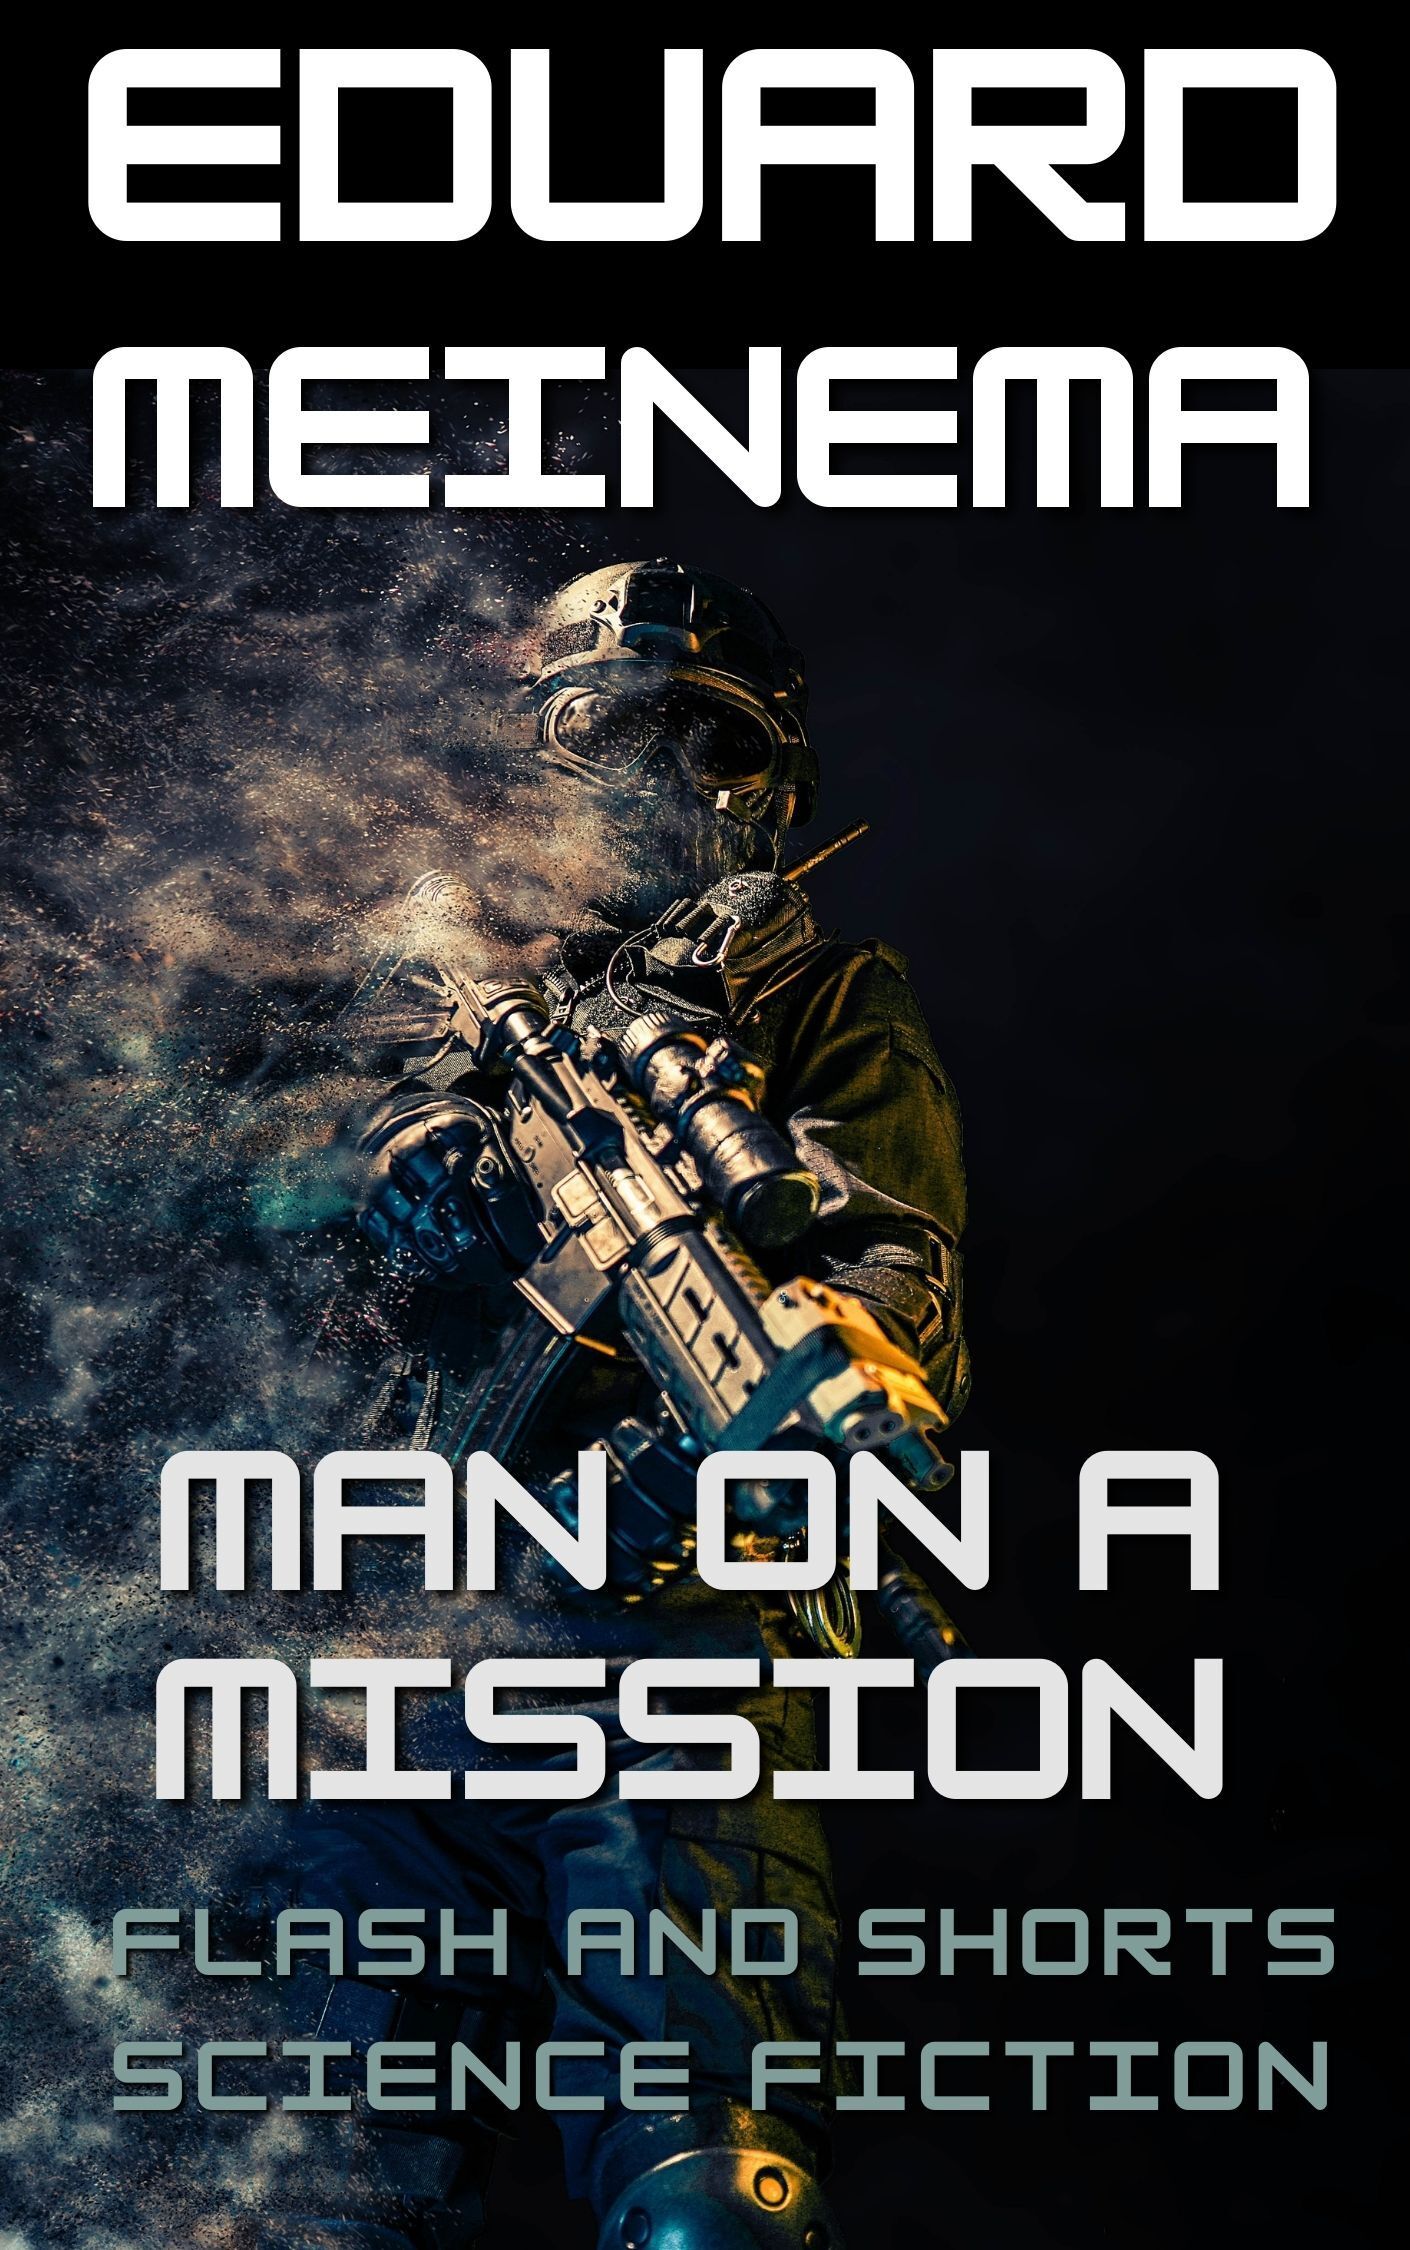 Man on a Mission, short story by Eduard Meinema.